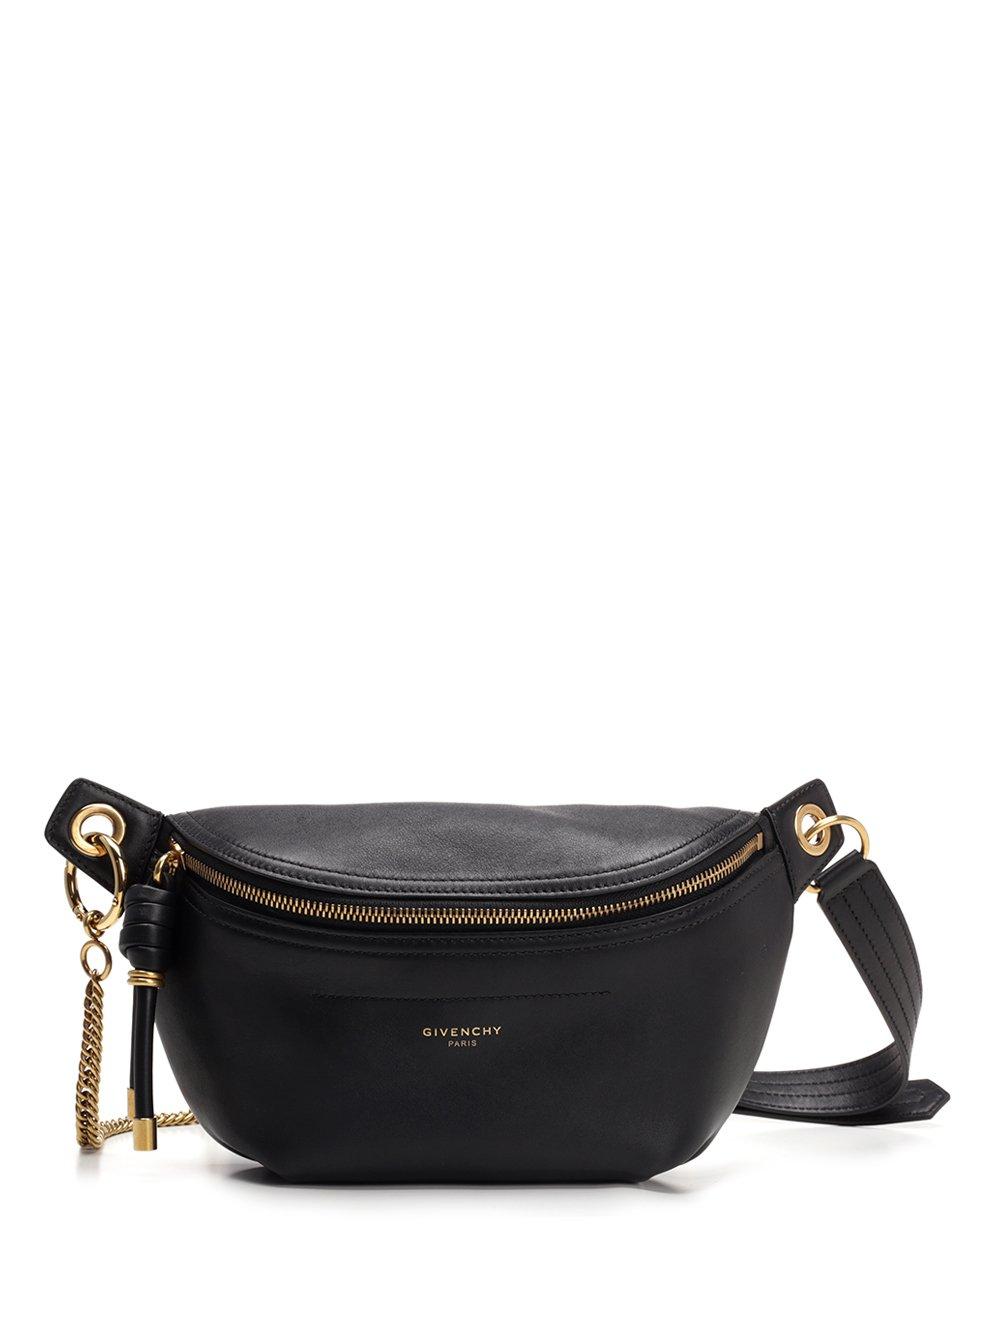 Givenchy Leather Whip Bum Bag in Black 